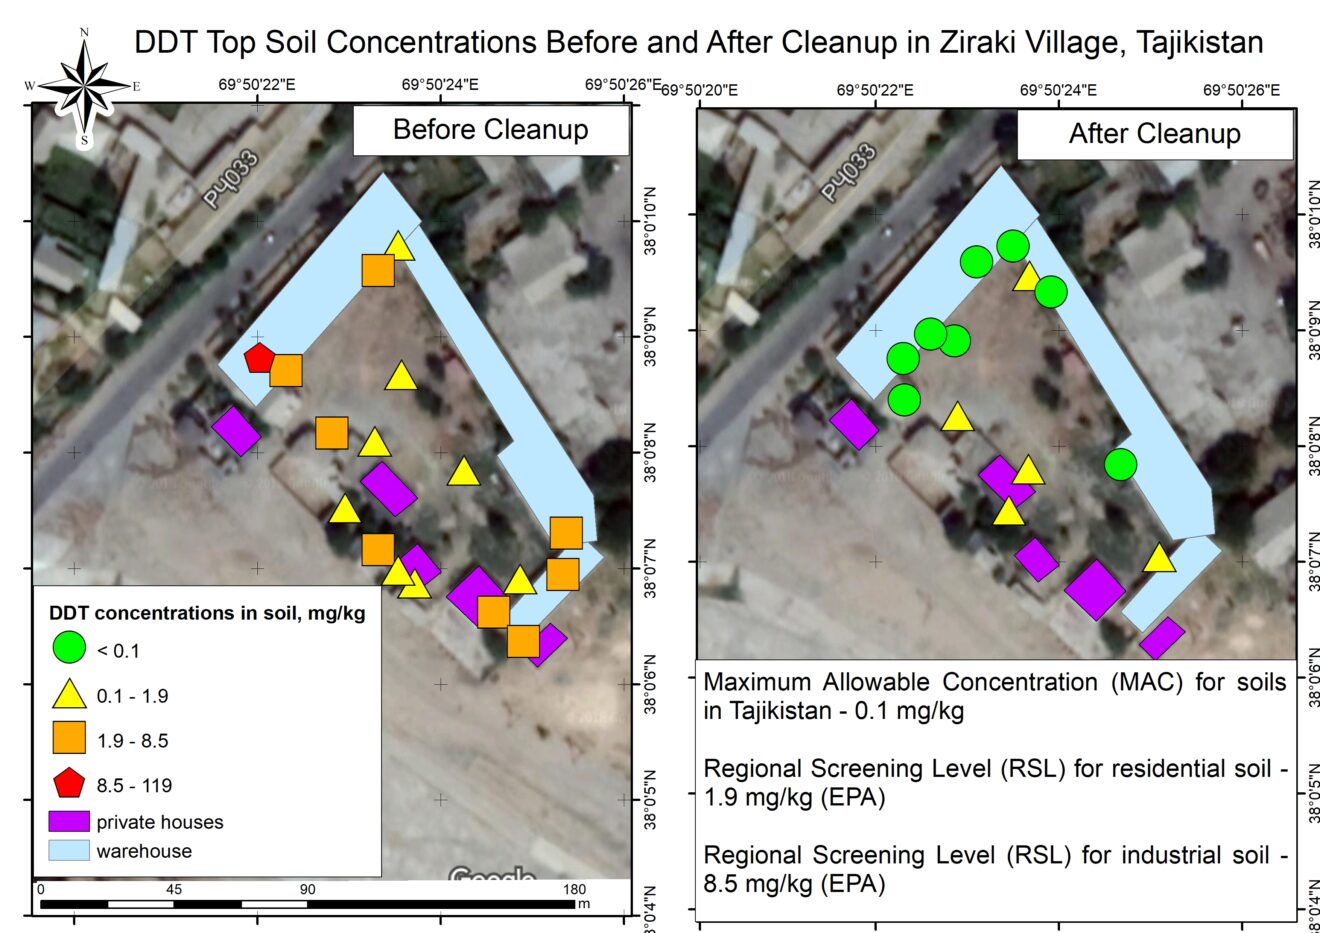 DDT topsoil concentrations before and after cleanup in Ziraki Village, Tajikistan, Peshsaf, Environmental Health and Pollution Health Institute, EHPMI